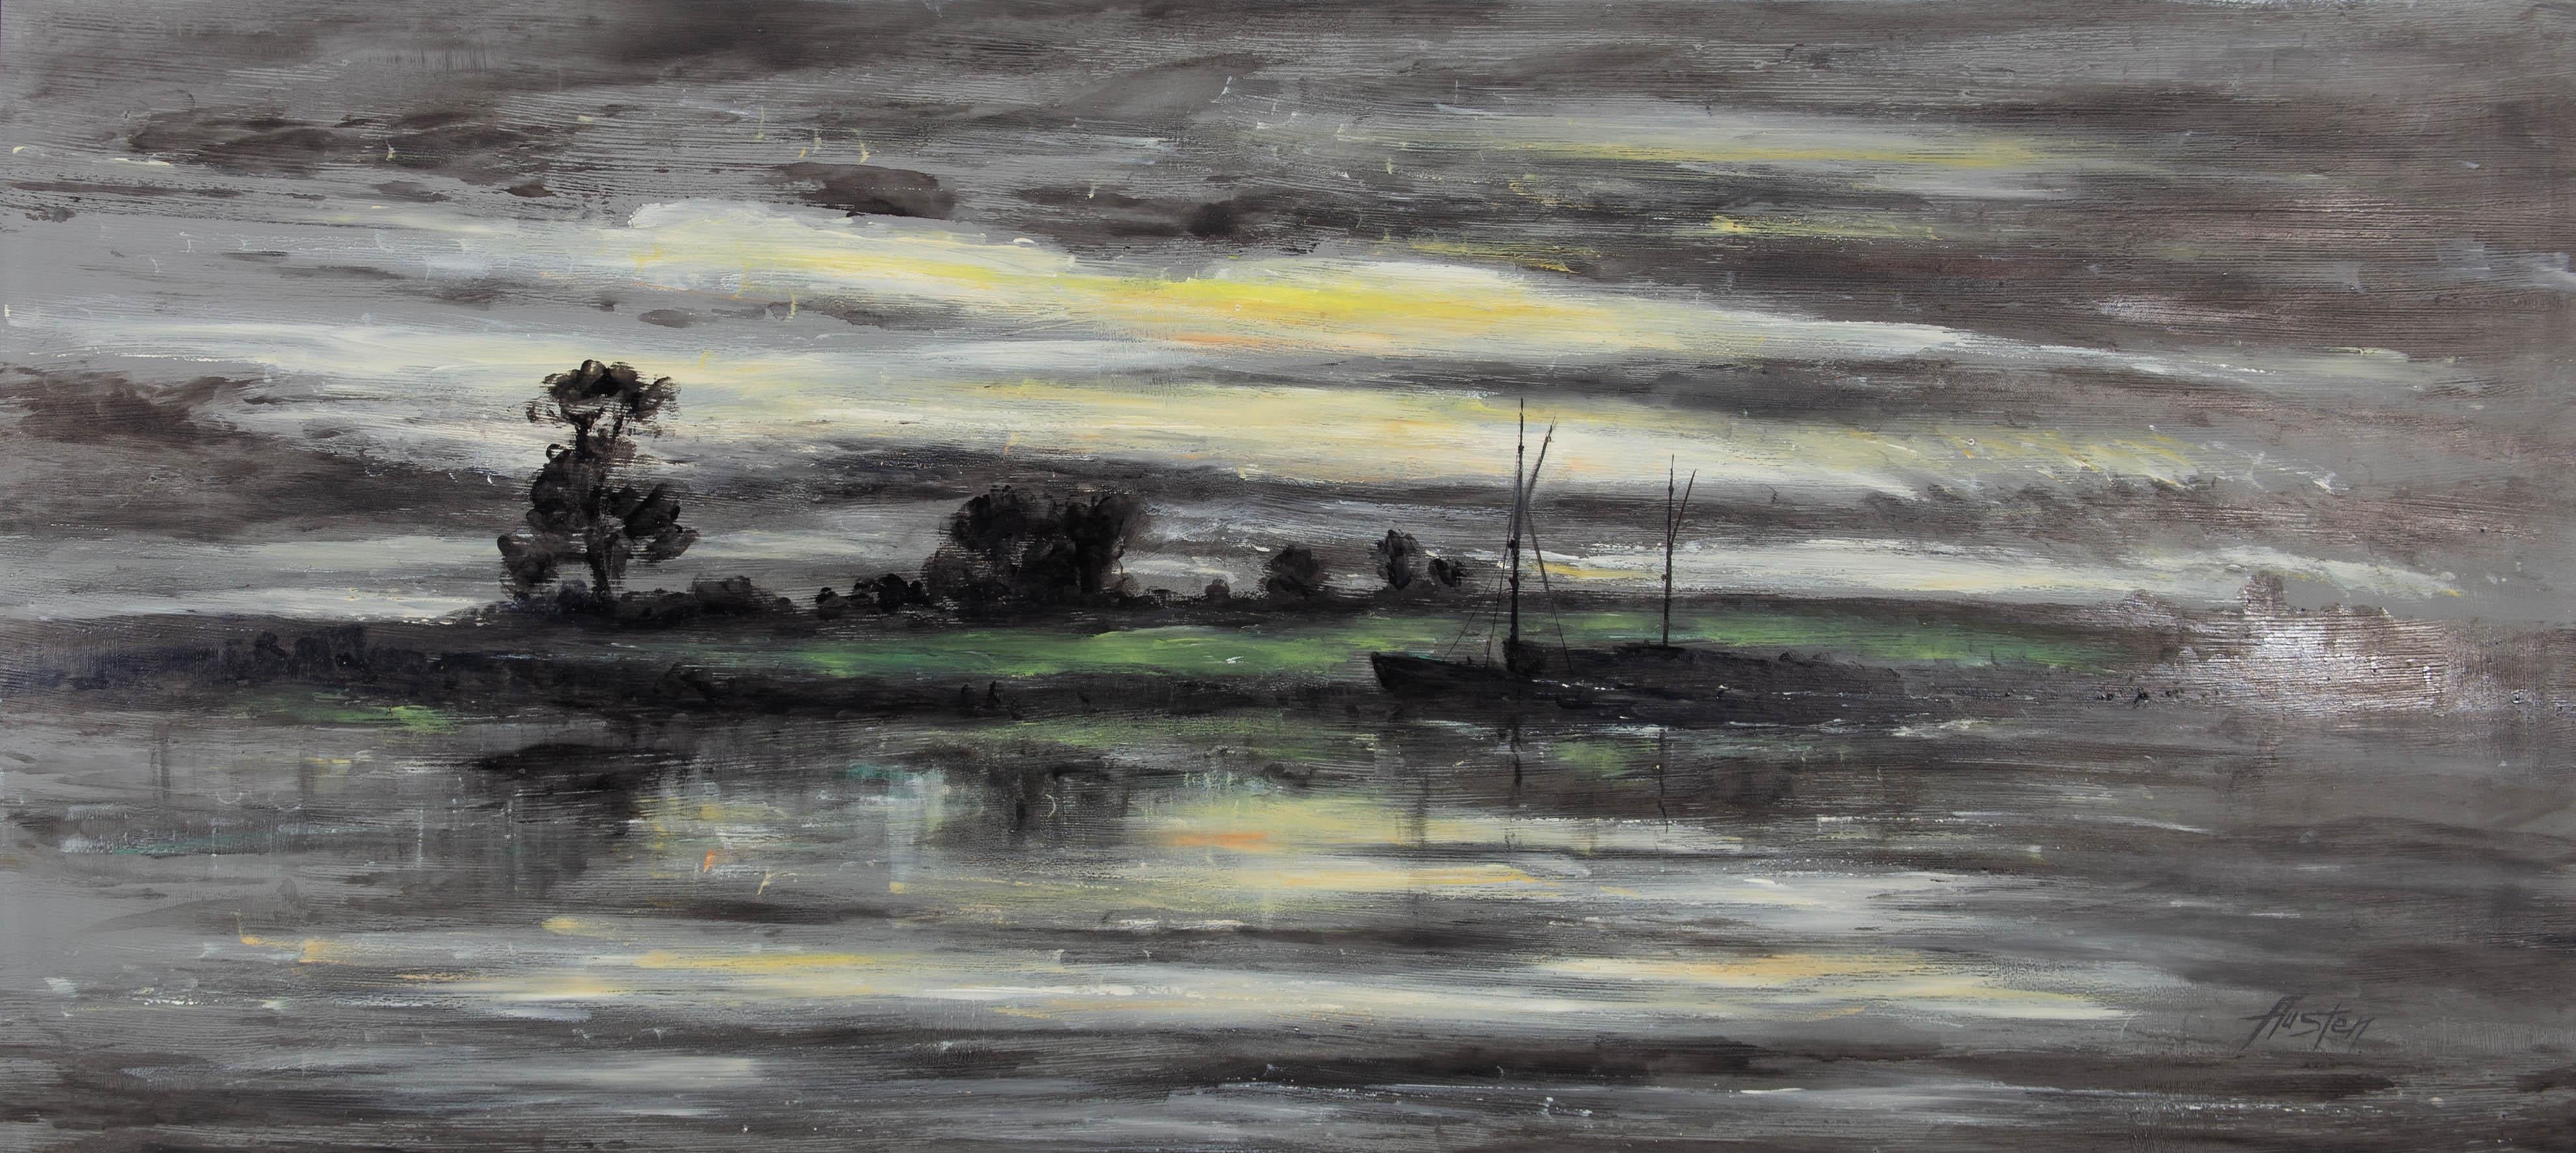 This atmospheric landscape depicts boats on on a calm river at night. Signed to the lower right. Presented in a white wooden frame. On canvas board.

























